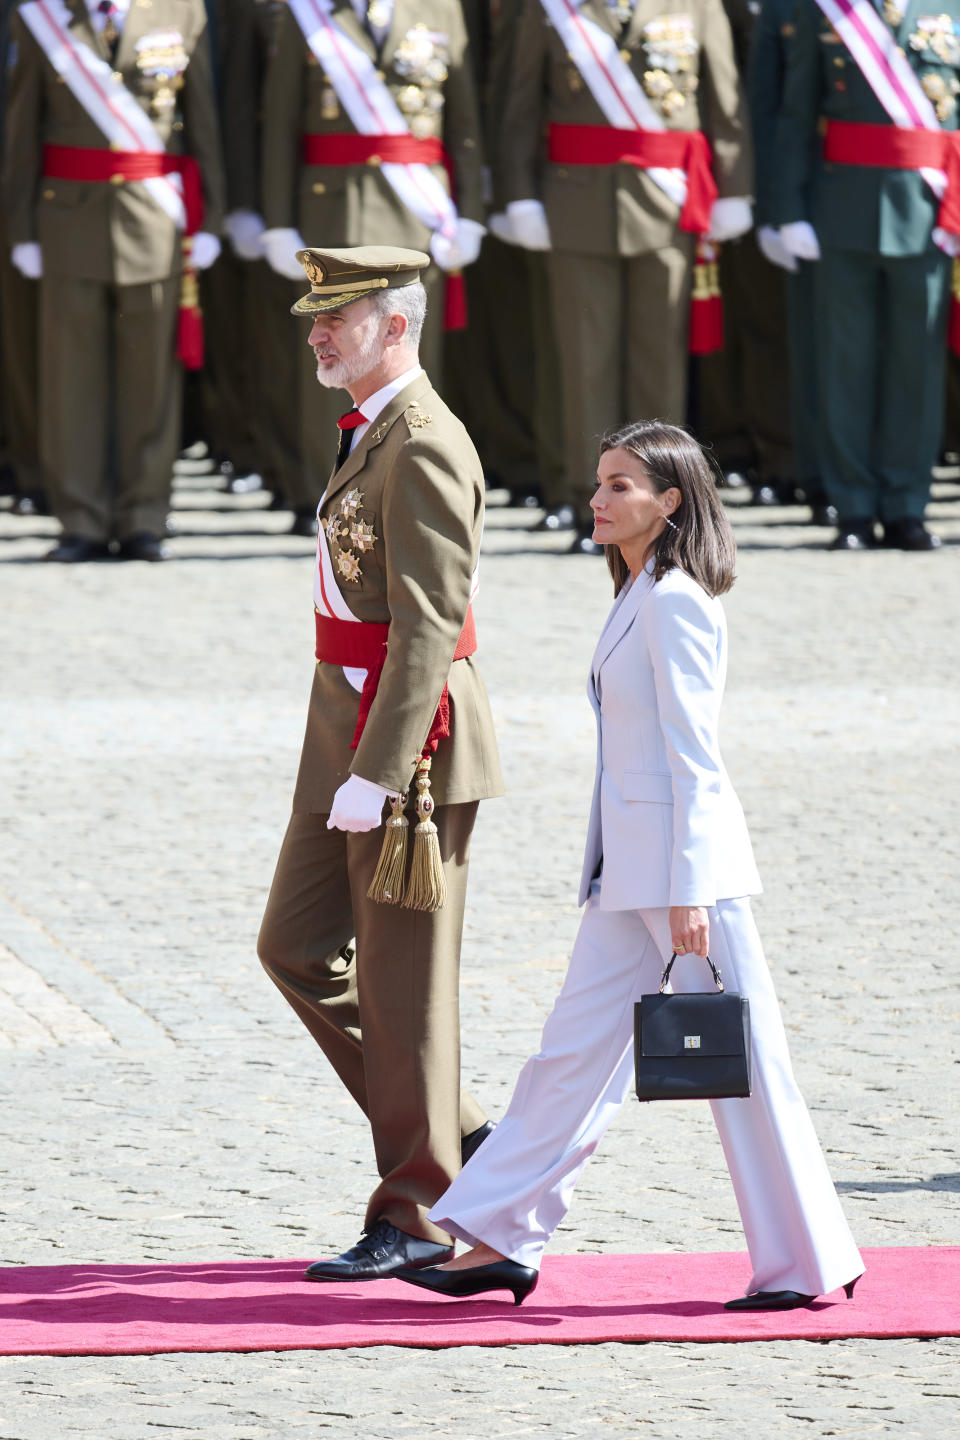 ZARAGOZA, SPAIN - MAY 04: King Felipe VI of Spain and Queen Letizia of Spain attend the 40th anniversary of the Flag Oath of the 44th promotion of the General Military Academy on May 04, 2024 in Zaragoza, Spain. (Photo by Carlos Alvarez/Getty Images)